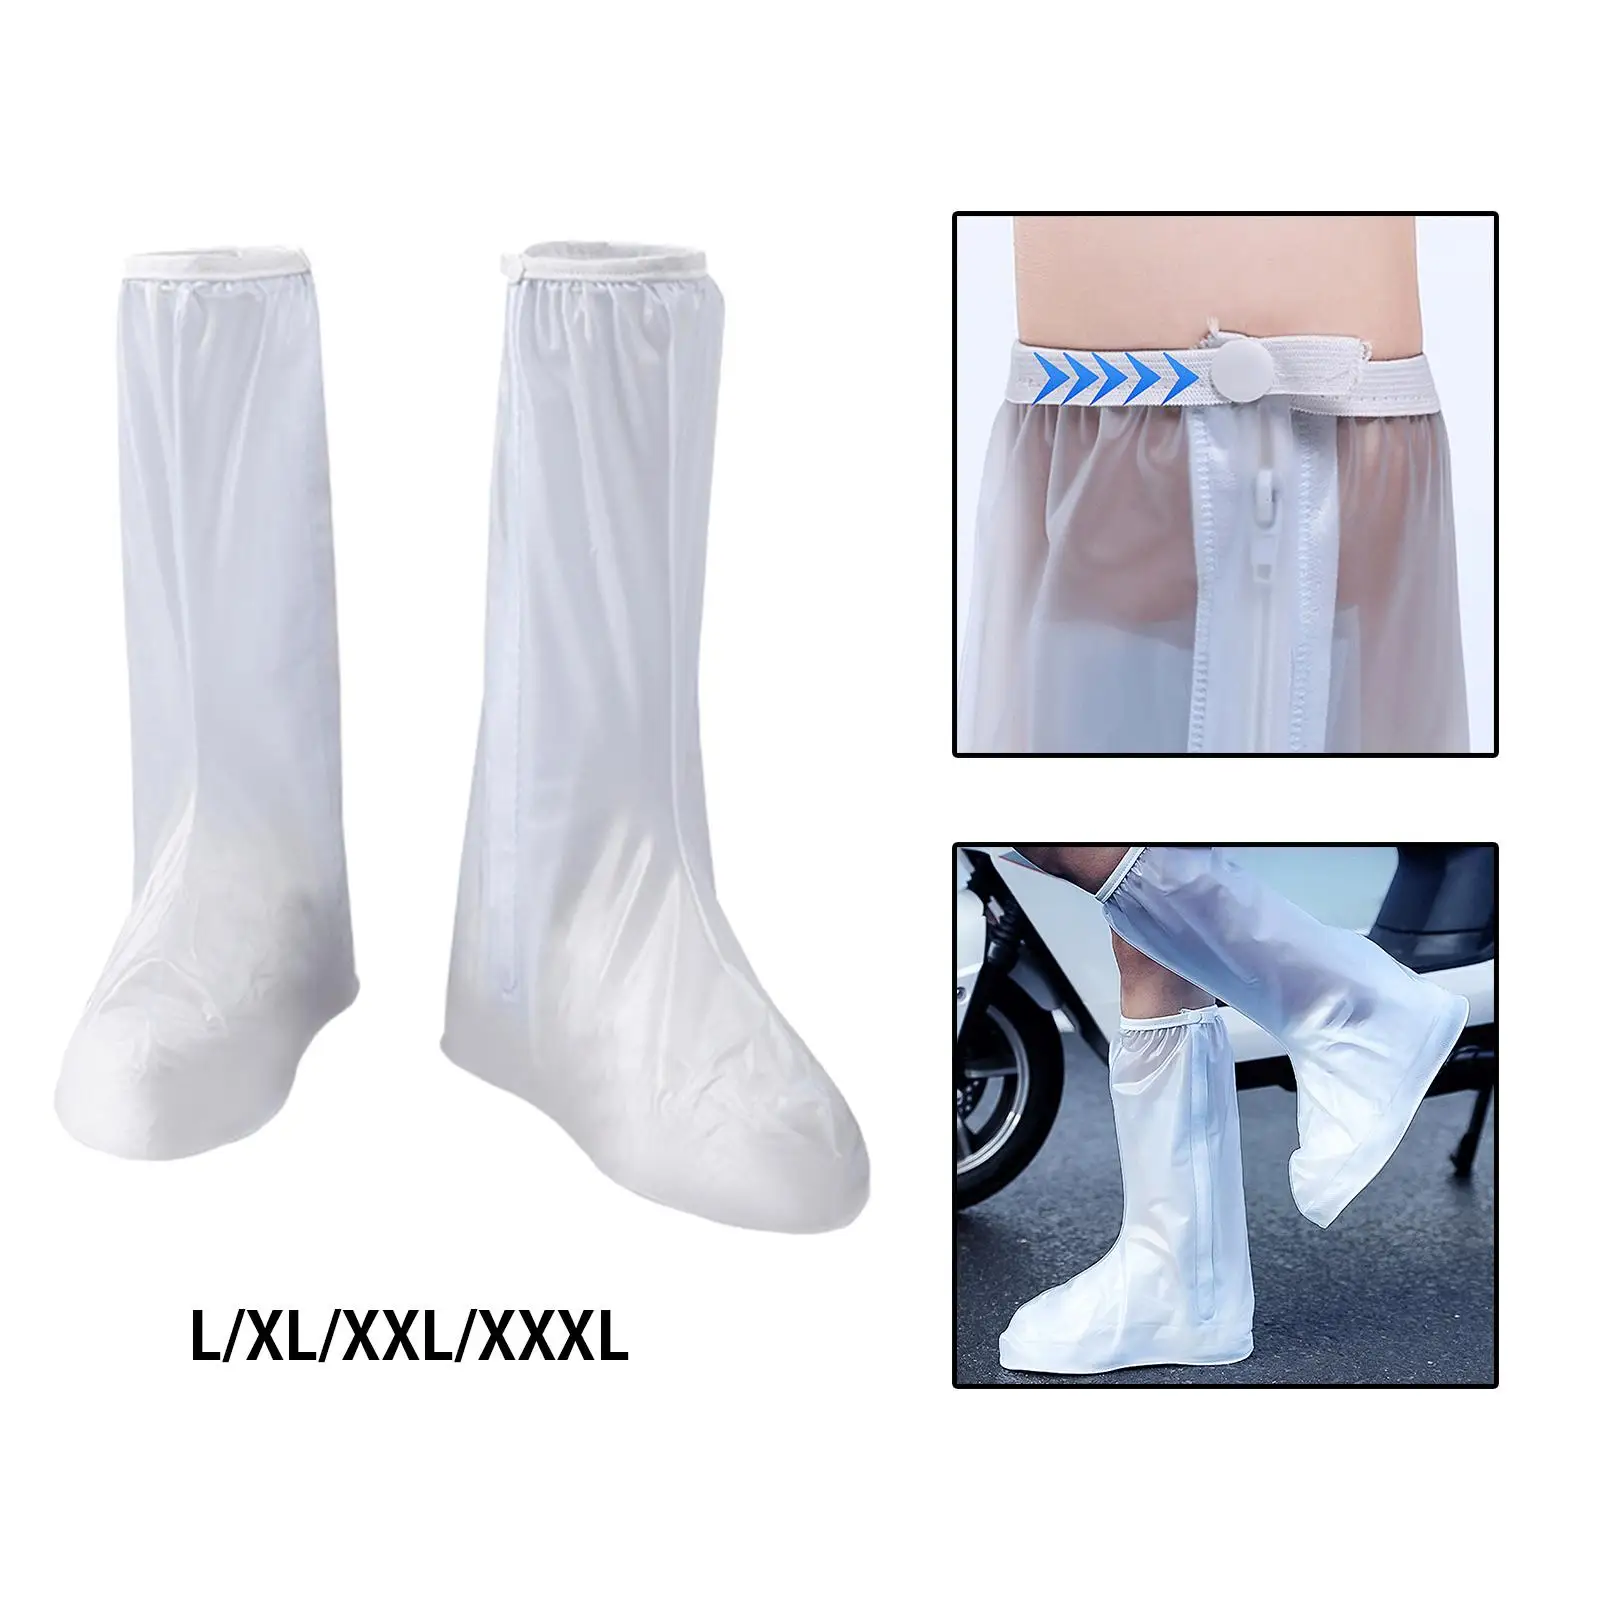  Waterproof Rain Shoes Cover  Covering Overshoes Non  Rain Galoshes Reusable PVC for Motorcycle Cycling Adults Fishing